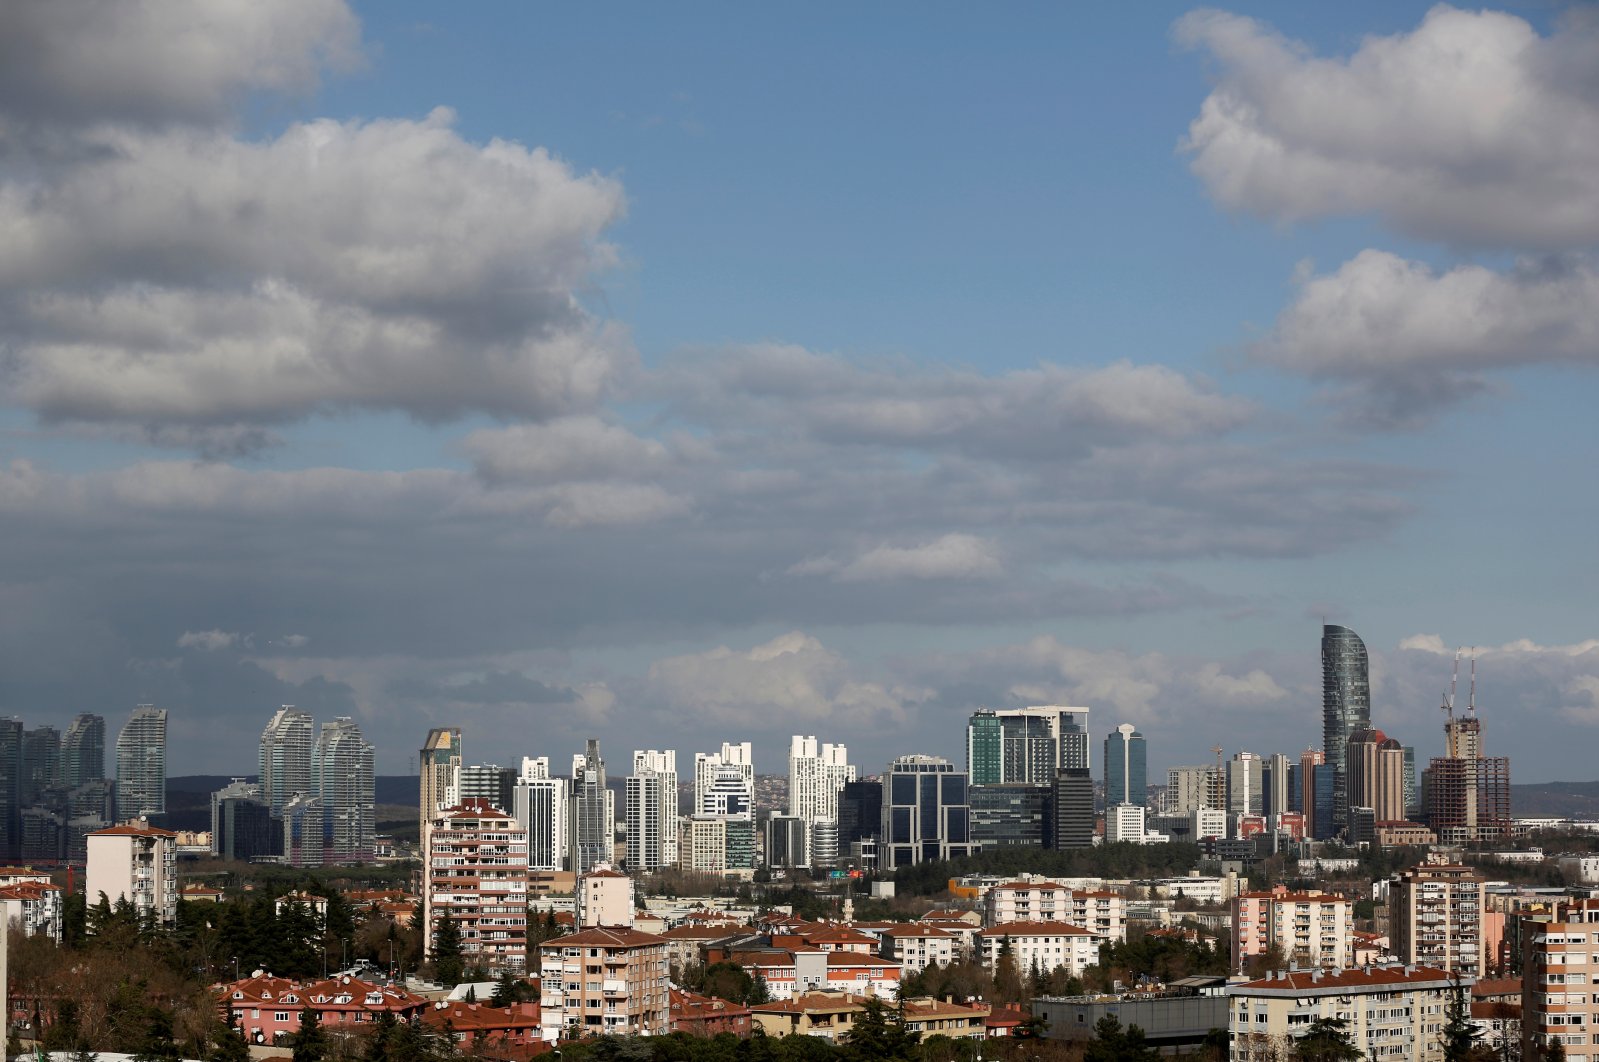 Skyscrapers in the Maslak business and financial district are seen behind the residential apartment blocks in Istanbul, Türkiye, Jan. 23, 2020. (Reuters Photo)